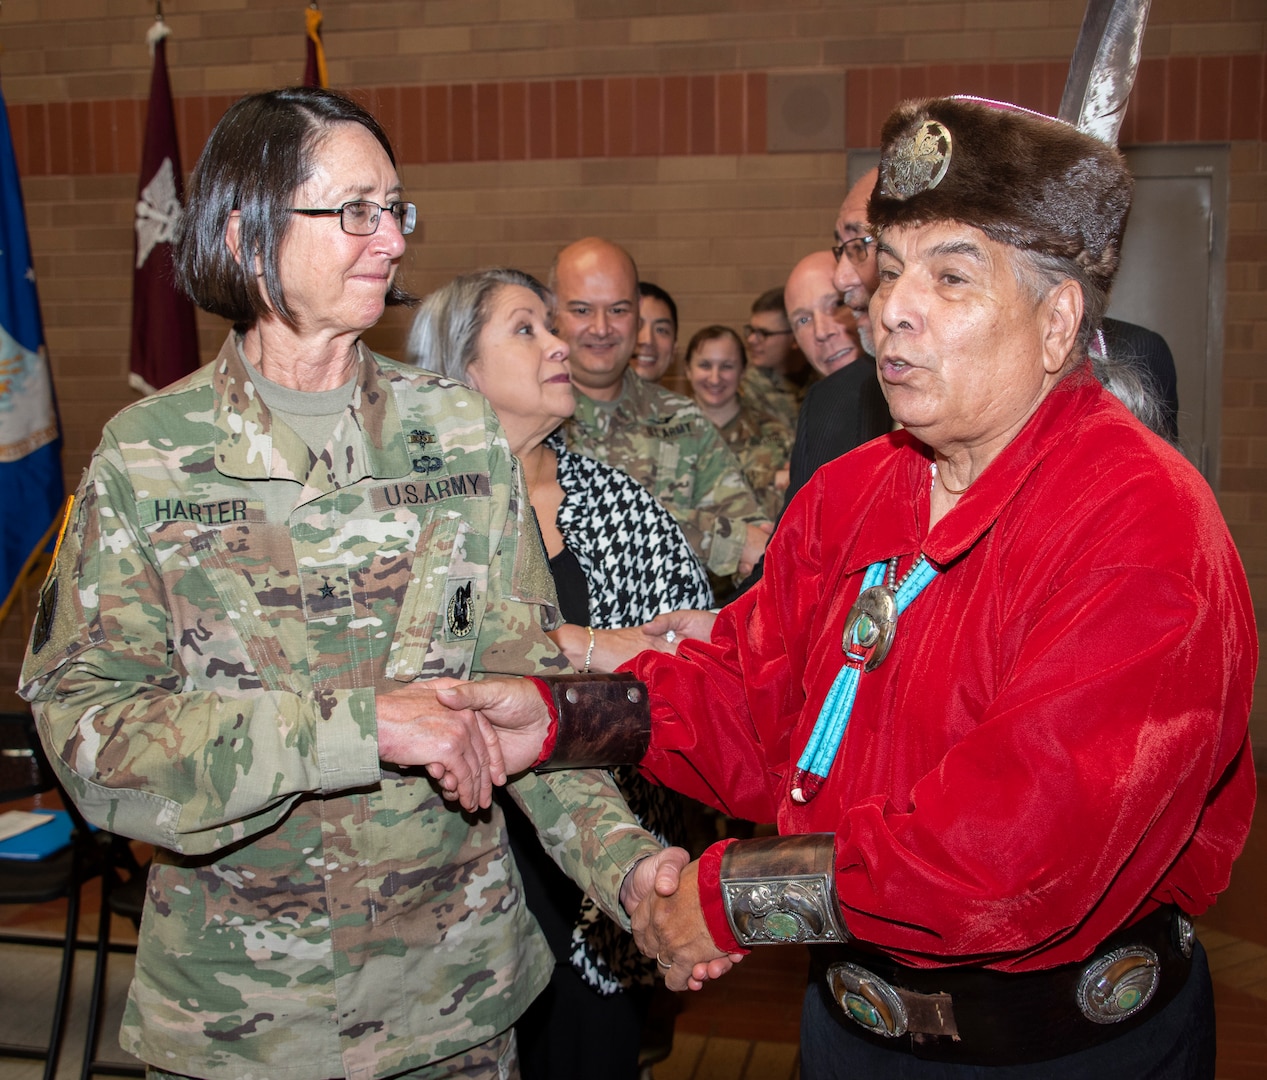 Erwin De Luna and Brooke Army Medical Center Commanding General Brig. Gen. Wendy Harter lead BAMC staff members in a traditional Native American dance during the National American Indian Heritage Month observance Nov. 26. De Luna is president of the board of directors for the United San Antonio Pow Wow Inc., and is of Taos Pueblo and Navajo ancestry.